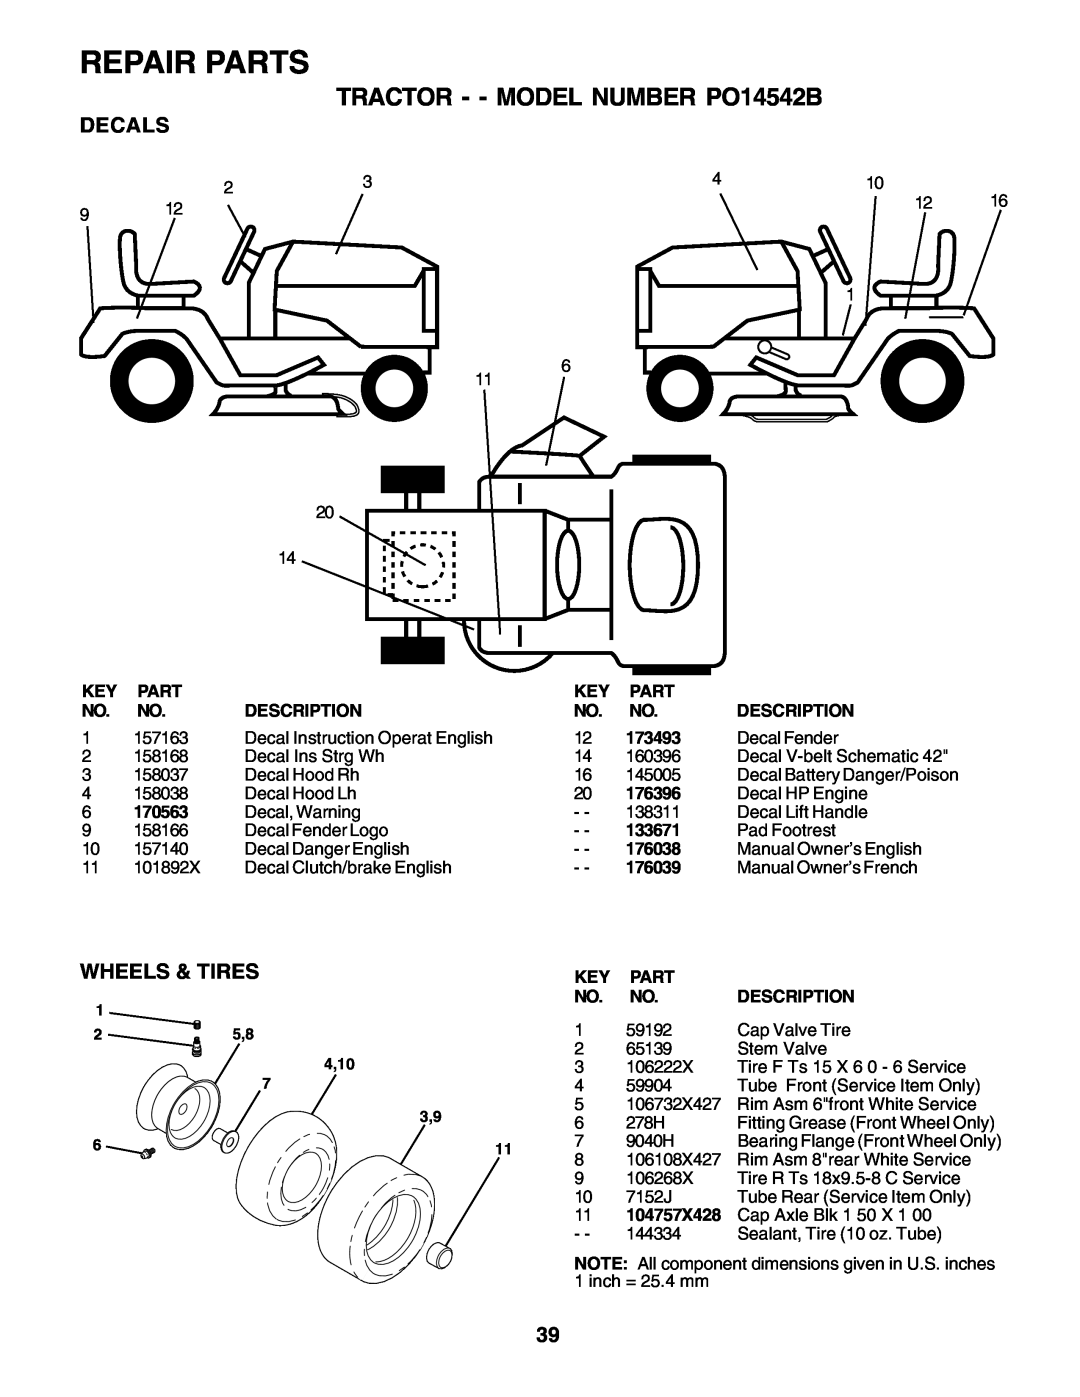 Poulan owner manual Decals, Wheels & Tires, Repair Parts, TRACTOR - - MODEL NUMBER PO14542B, 4,10 